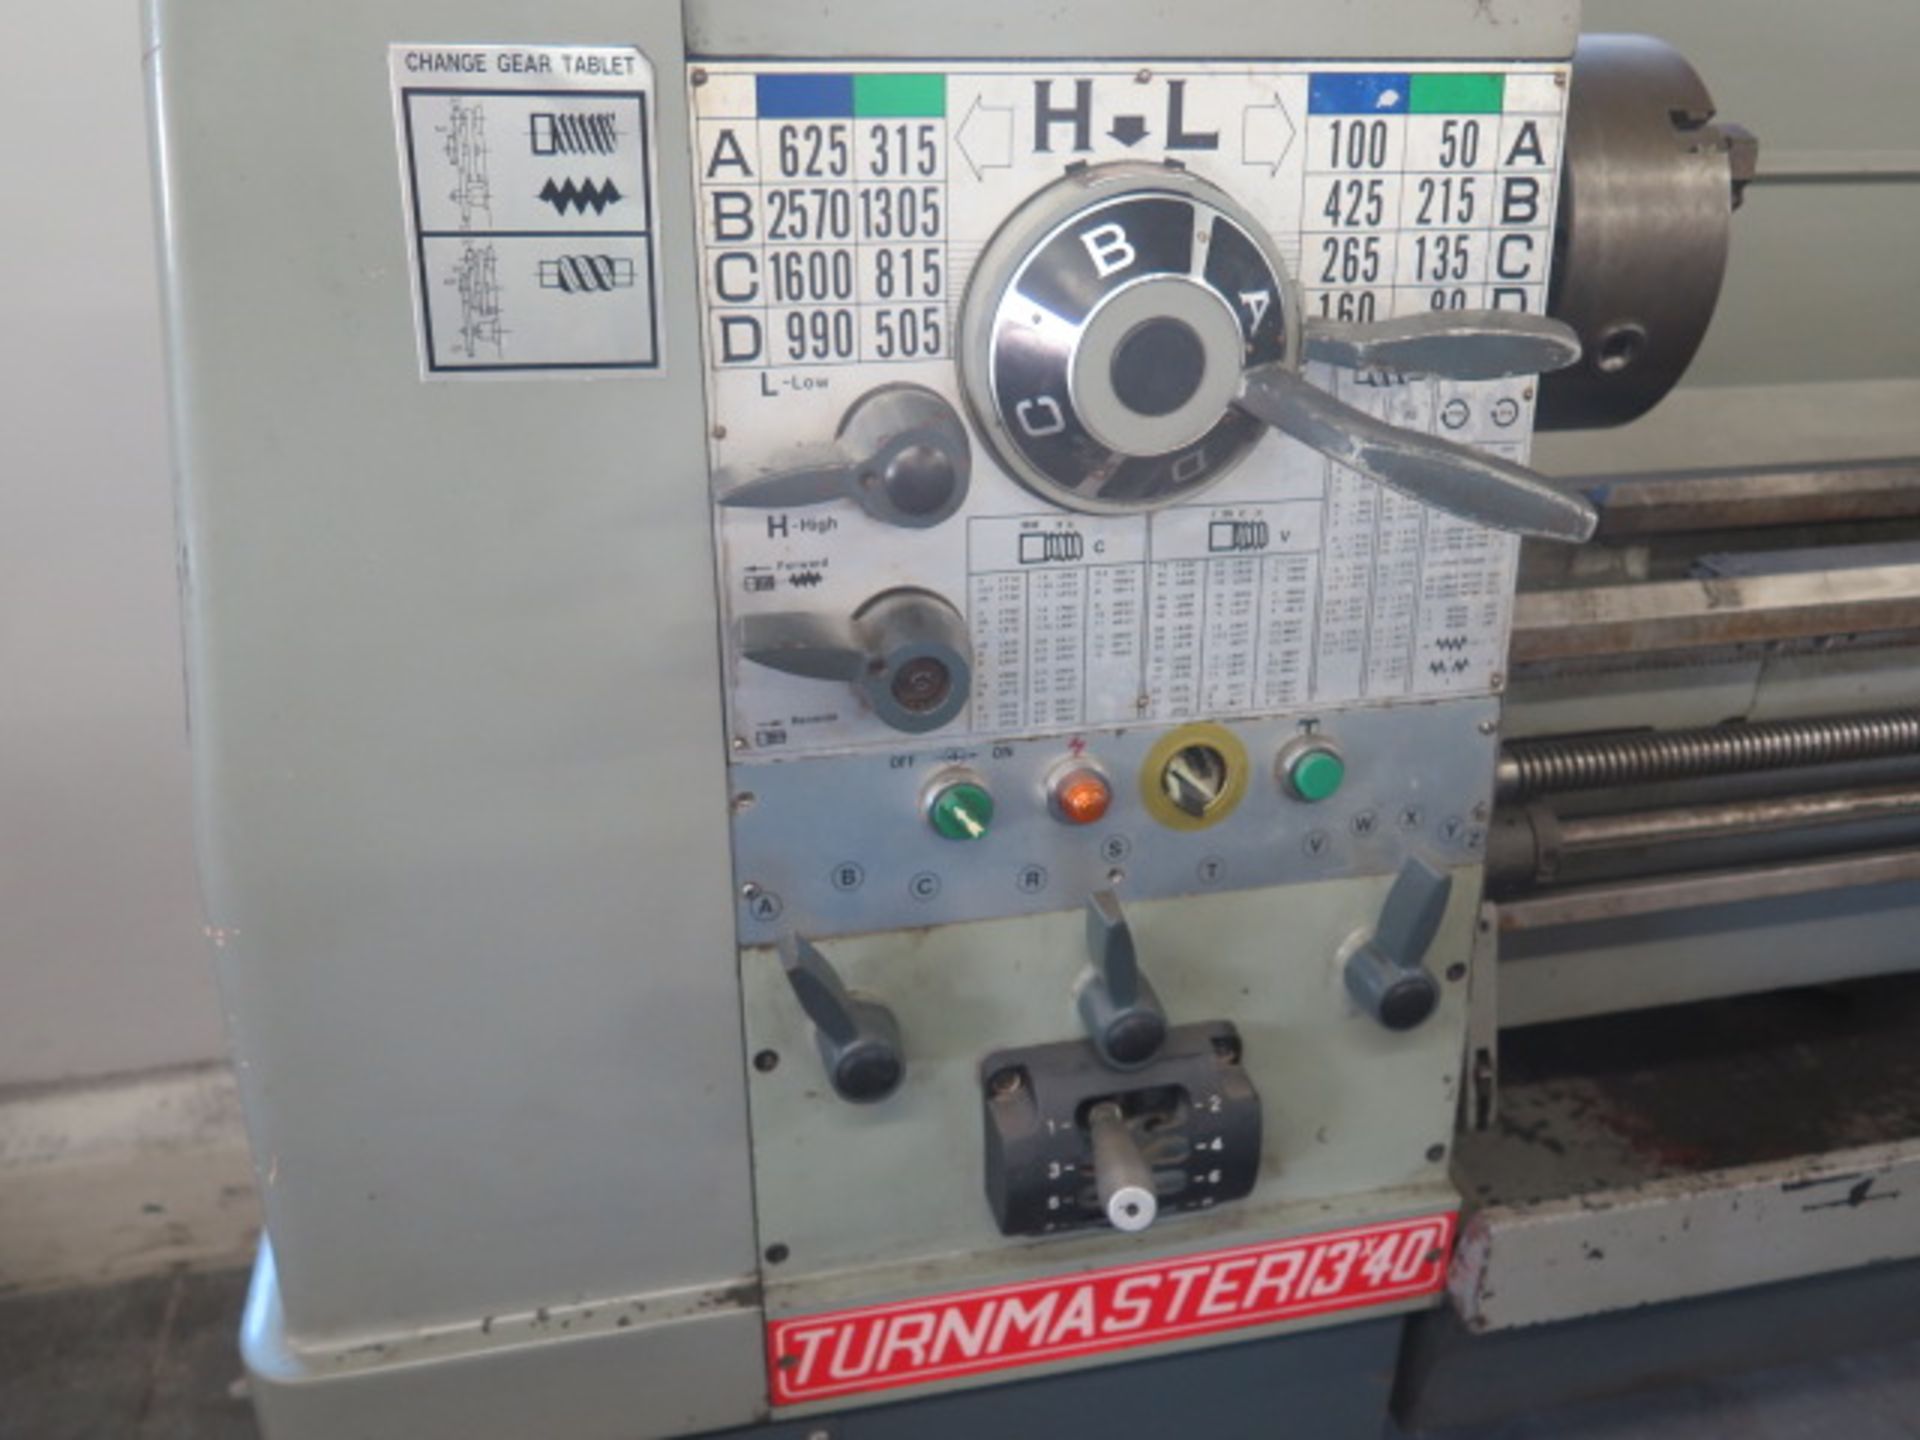 1997 Turret “Turnmaster” TRL-1340G 13” x 40” Geared Head Gap Bed Lathe s/n 13497011367, SOLD AS IS - Image 3 of 13